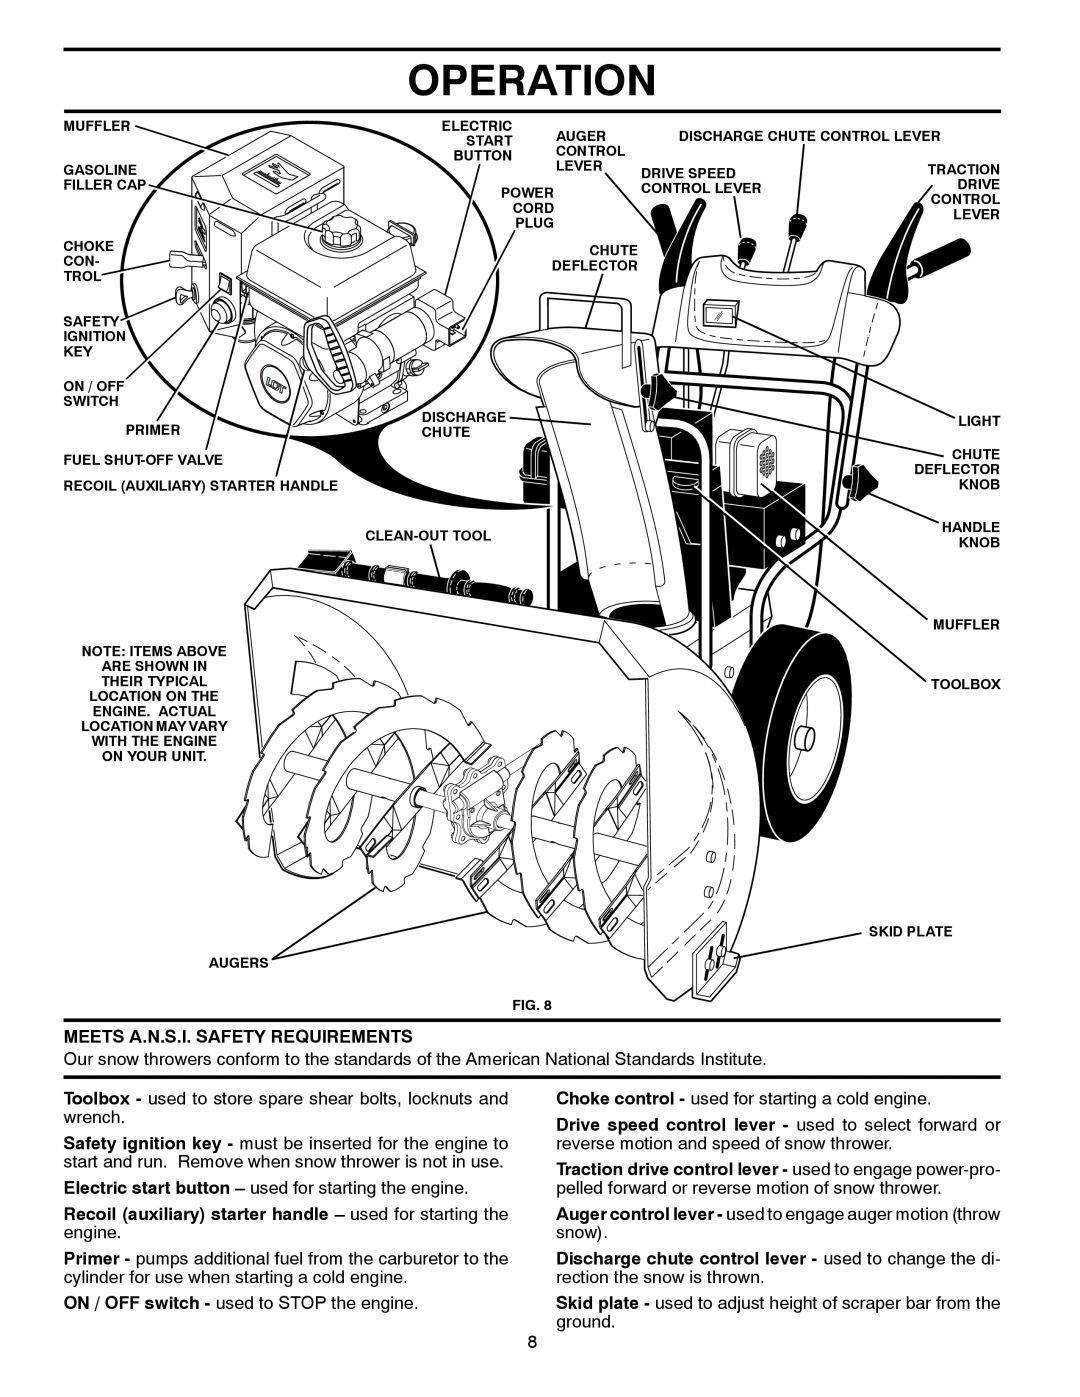 McCulloch 96192004100 Operation, Meets A.N.S.I. Safety Requirements, Electric start button - used for starting the engine 